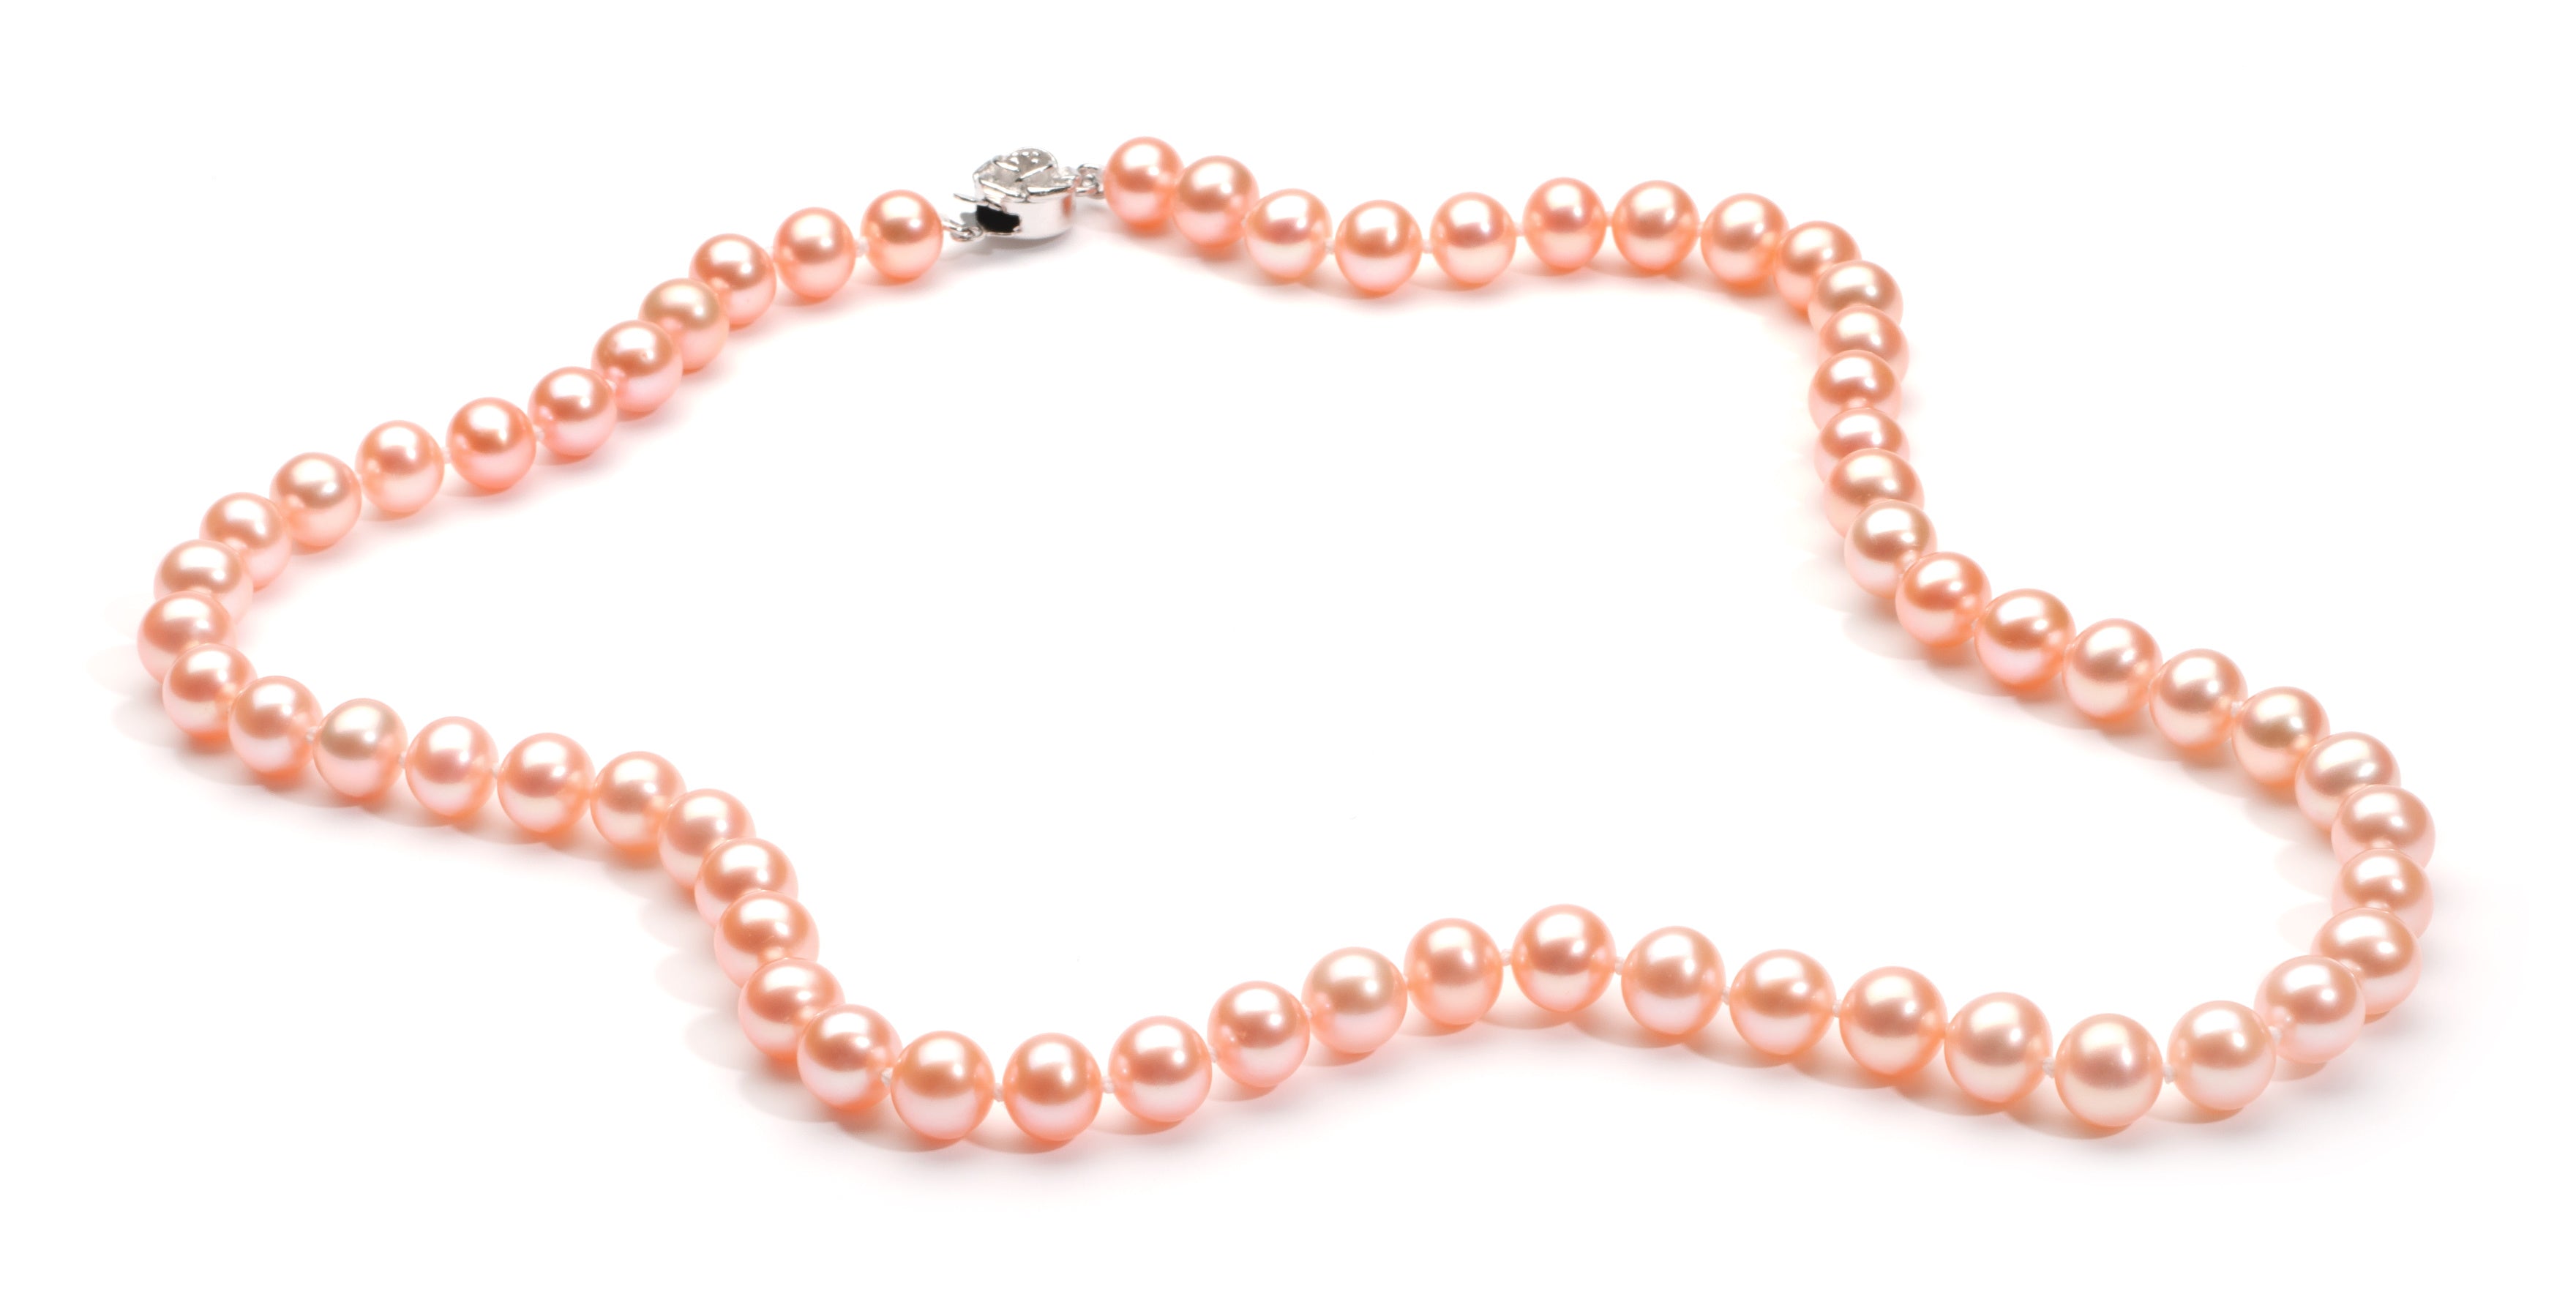 CPS Preciosa Simulated Birthstone Pearl Caged Necklace - Pink